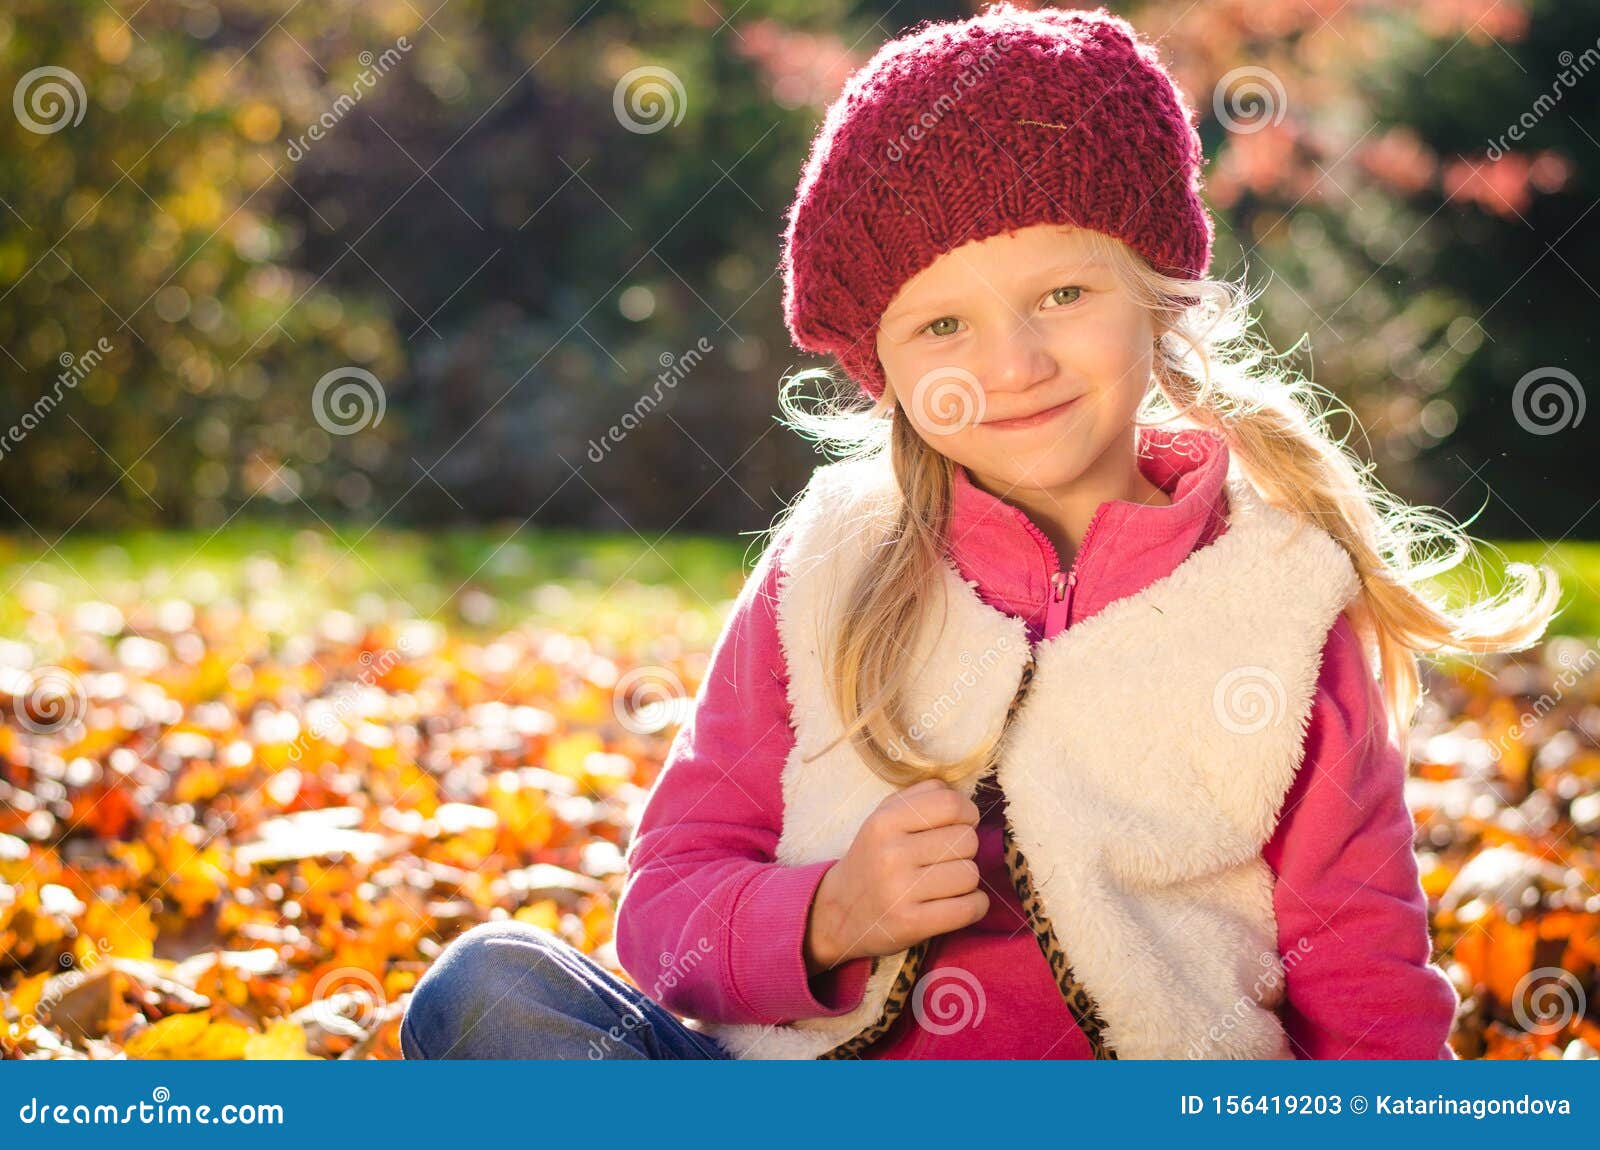 Adorable Child Having Fun in Afternoon Golden Hour Time Stock Image ...